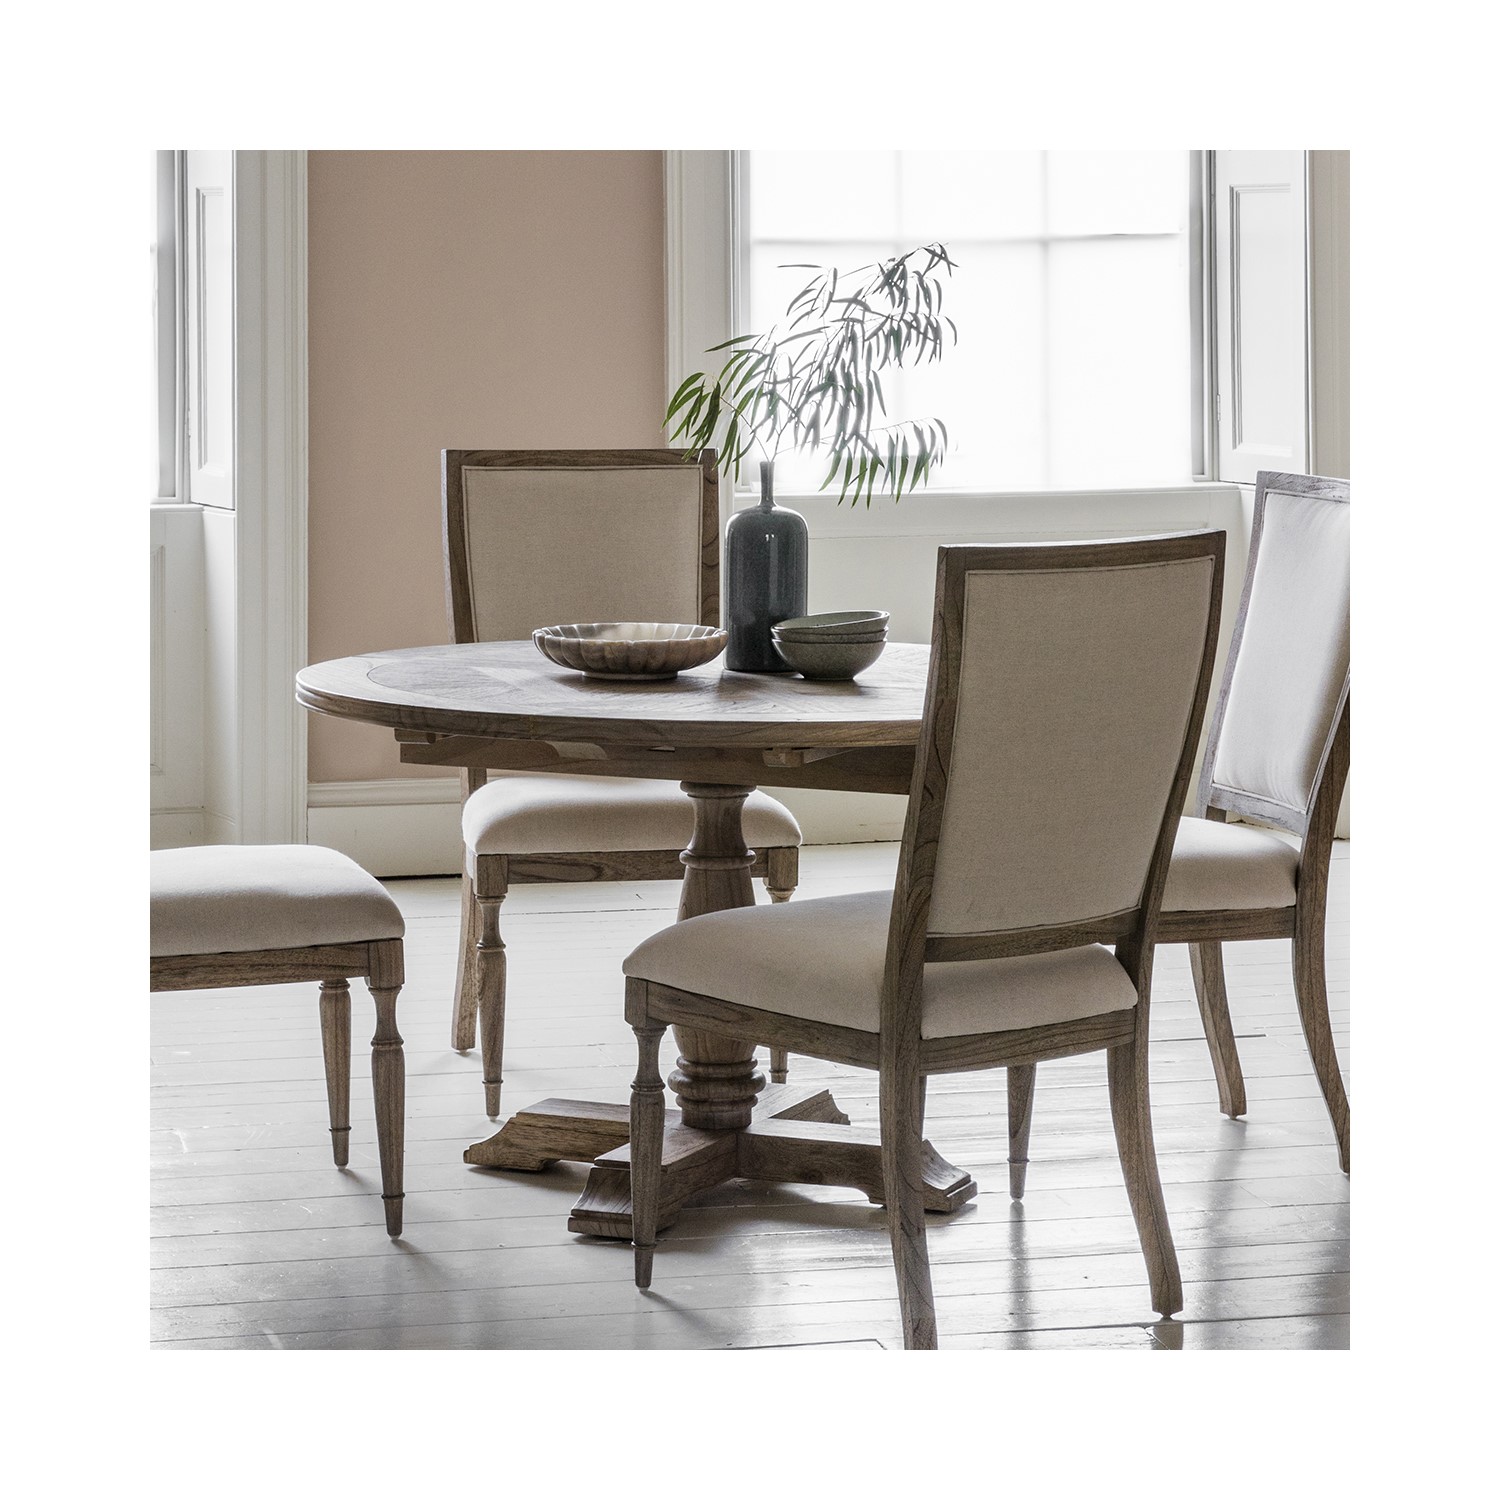 Read more about Round extendable dining table seats 4-6 caspian house